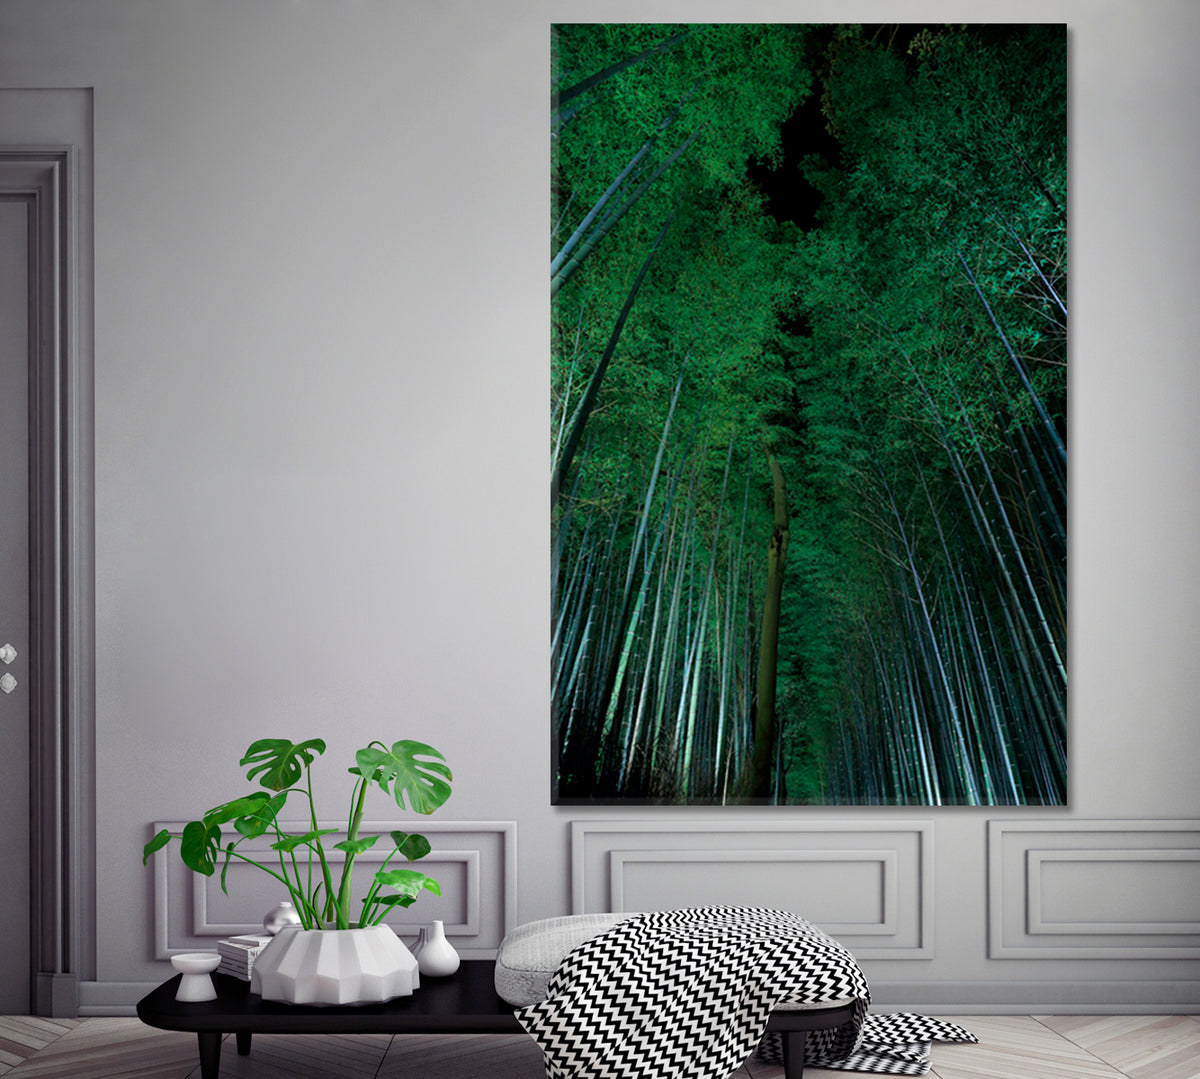 Bamboo Grove in Kyoto Exotic Forest Trees Canvas Print - Vertical Floral & Botanical Split Art Artesty 1 Panel 16"x24" 